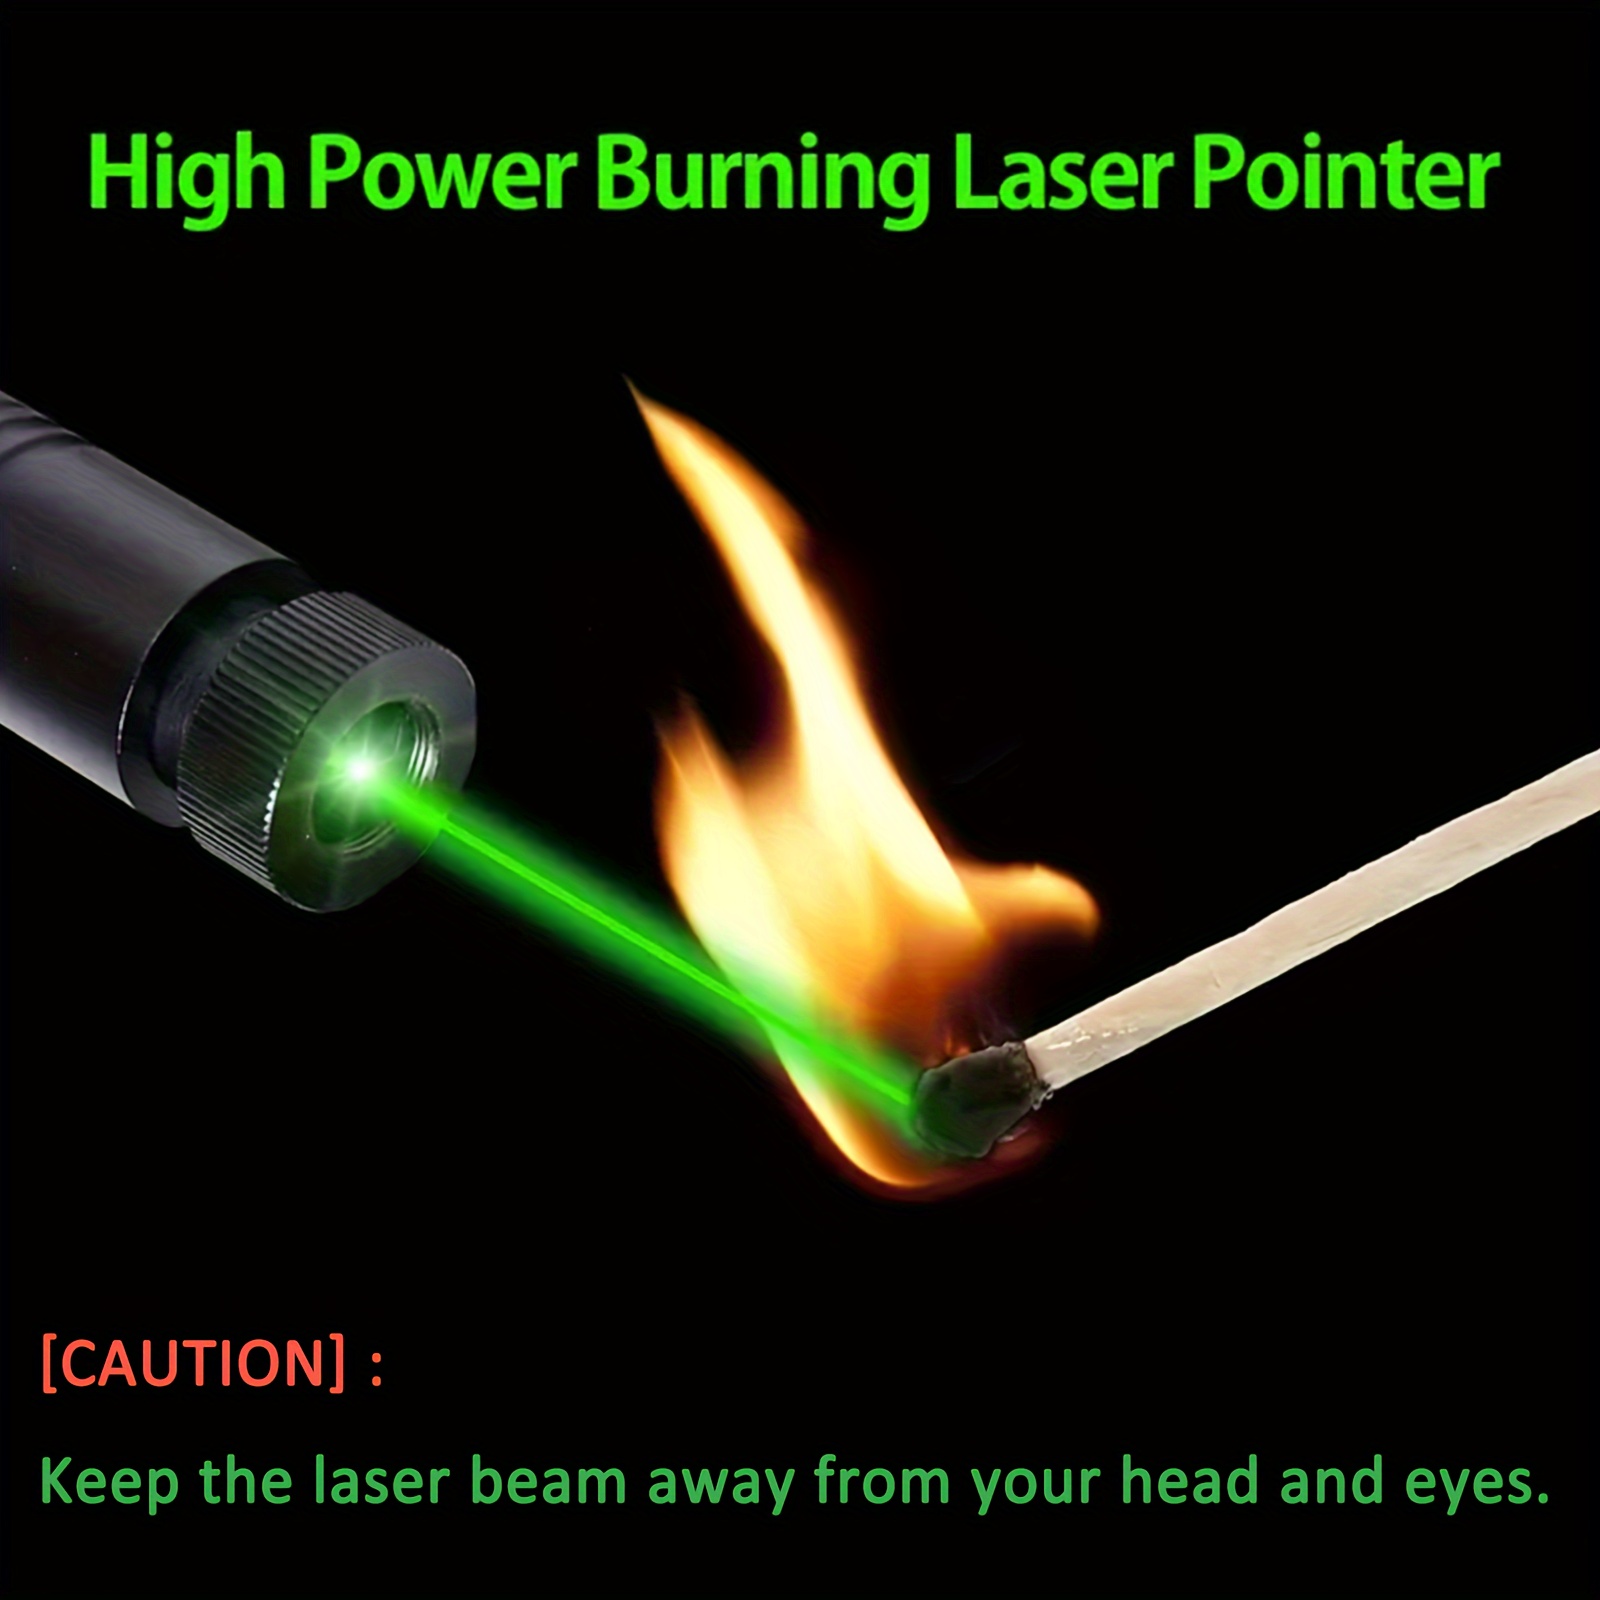 Green Laser Pointer High Power, Rechargeable Long Range 10000 Feet High  Power Laser Pointer for Night Astronomy Outdoor Camping Presentations